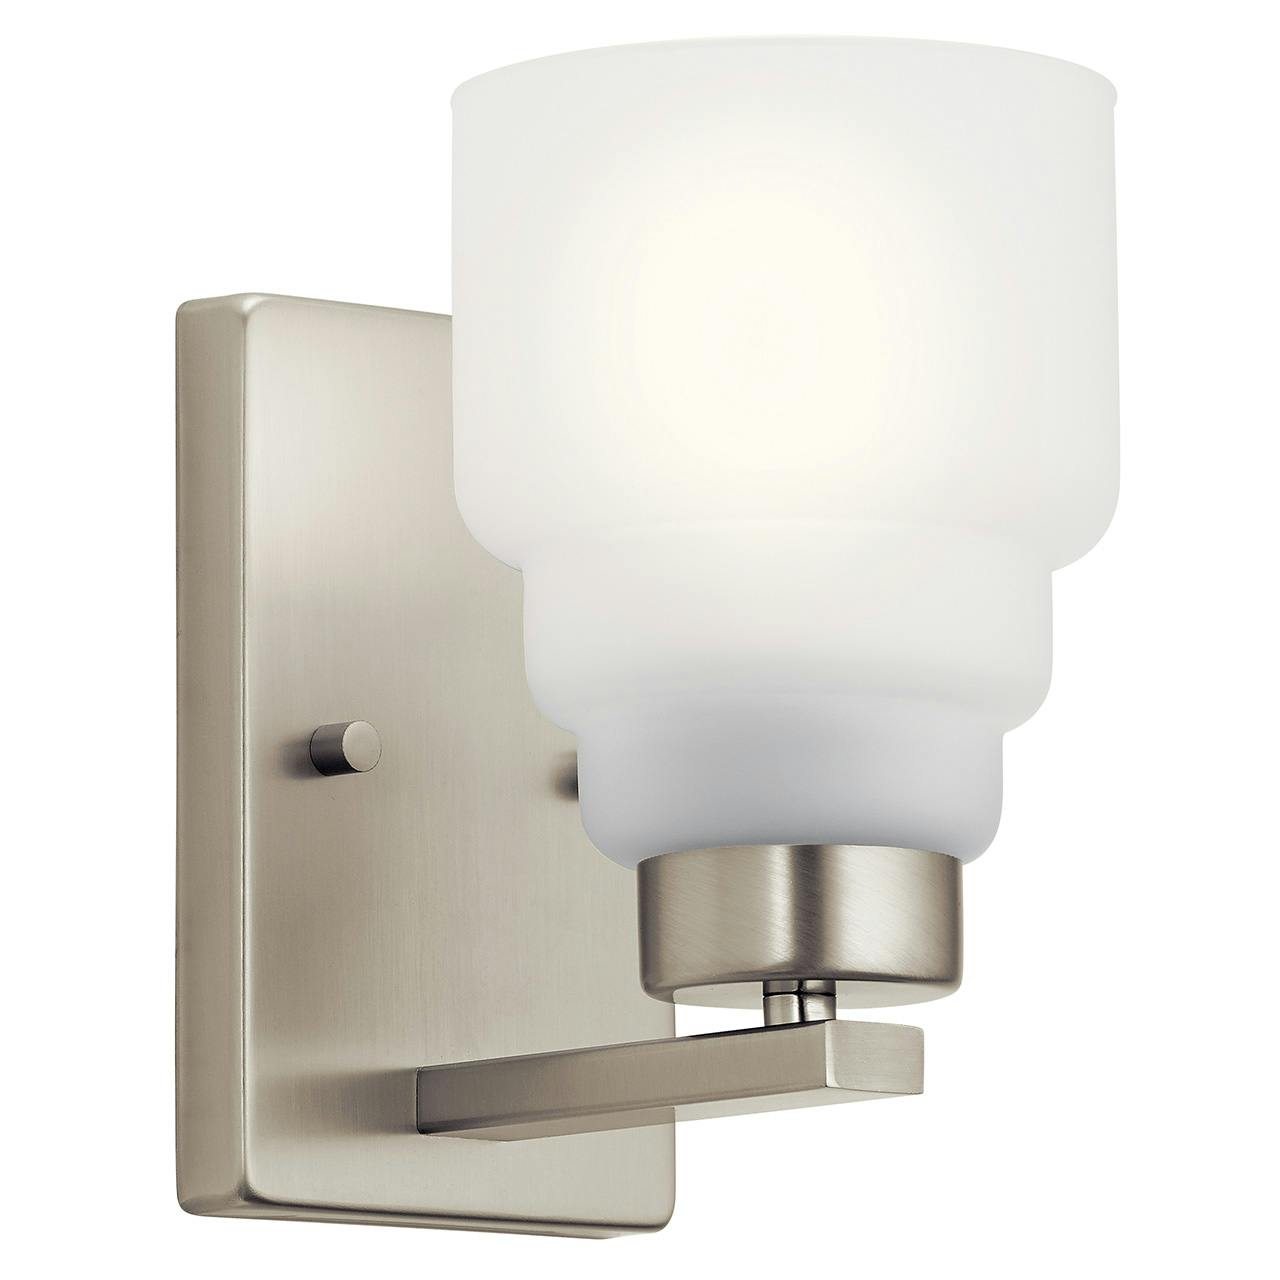 Vionnet 8.5" 1 Light Sconce in Nickel on a white background